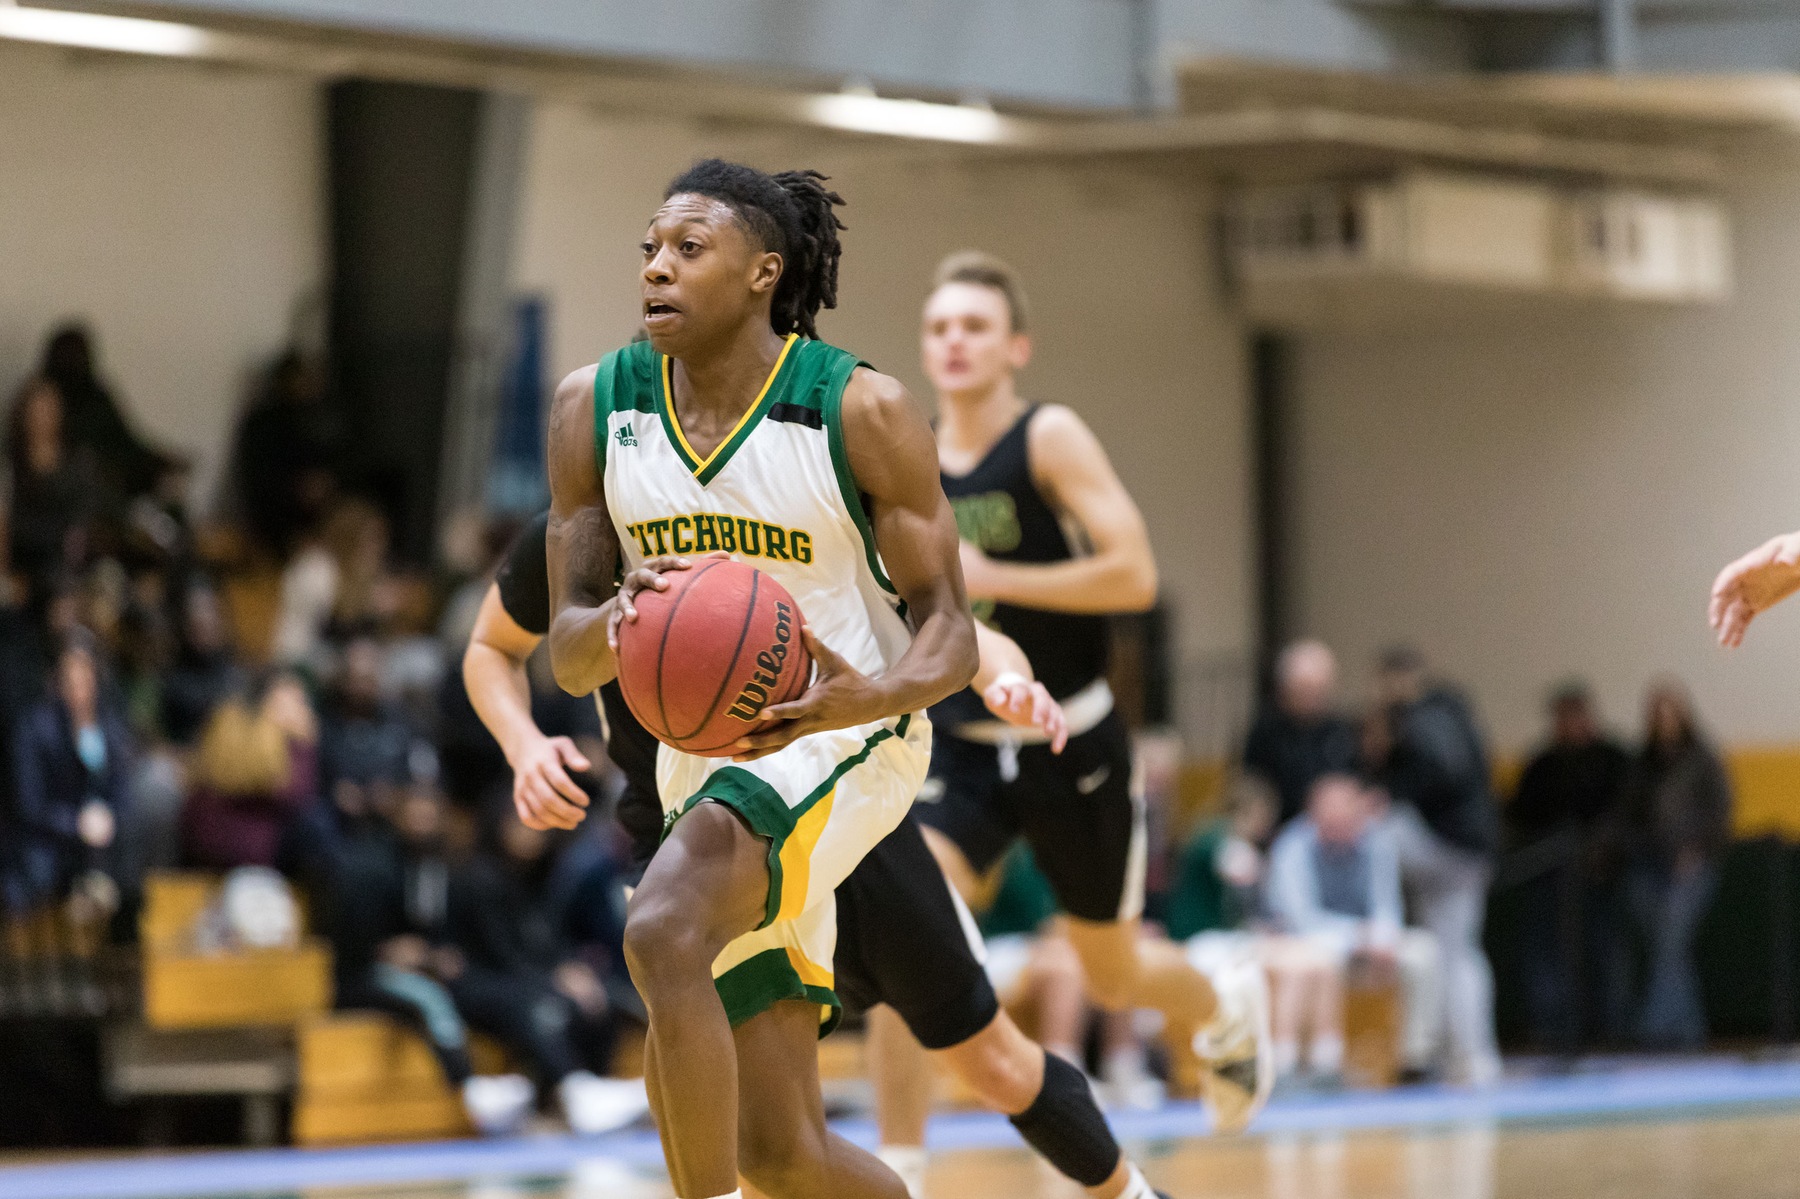 Falcons Fall to Vikings in MASCAC action 81-71